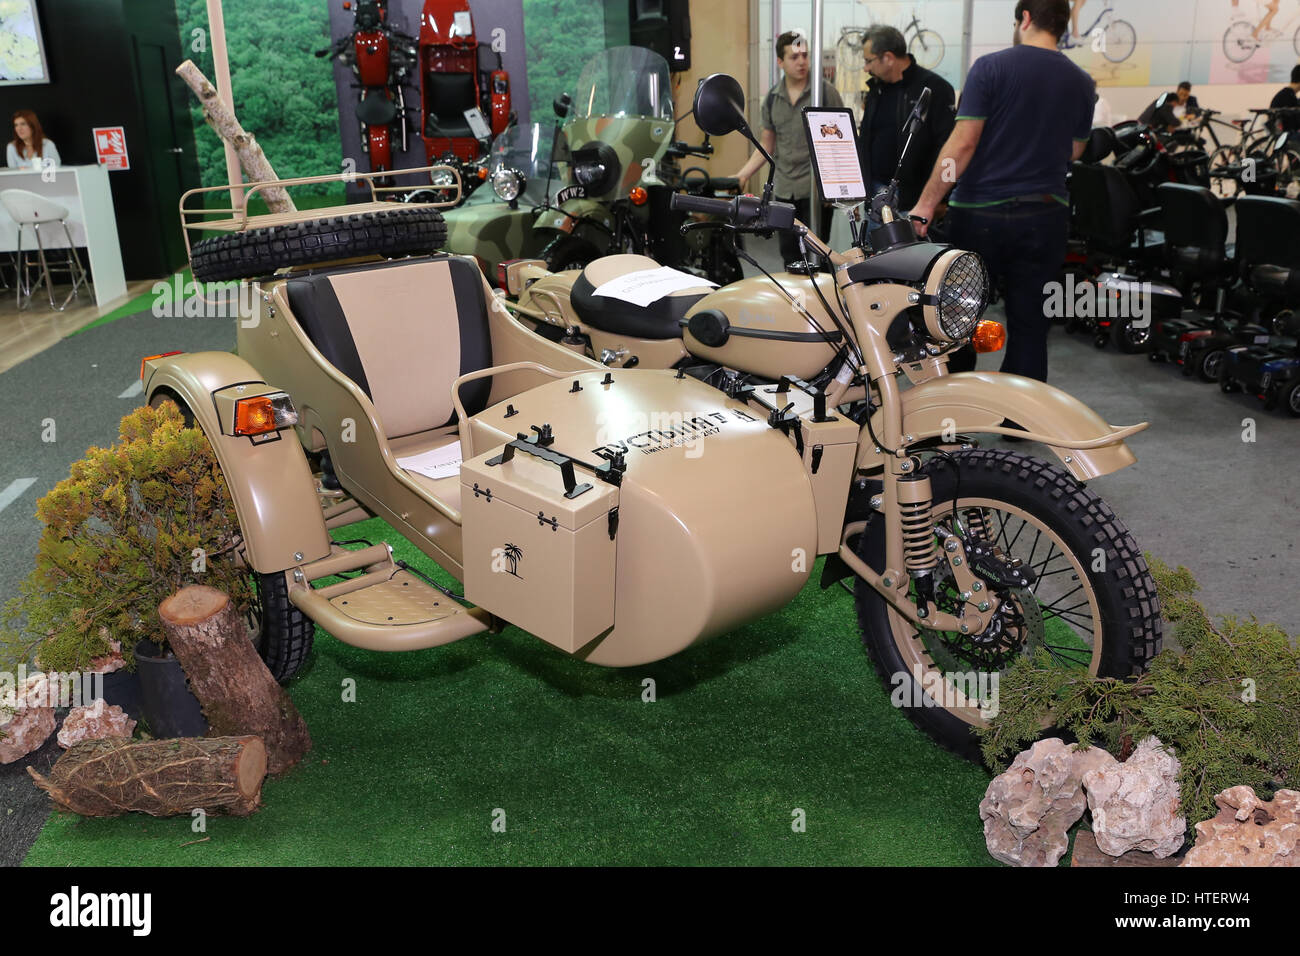 ISTANBUL, TURKEY - FEBRUARY 25, 2017: Ural motorcycle on display at Motobike Istanbul in Istanbul Exhibition Center Stock Photo